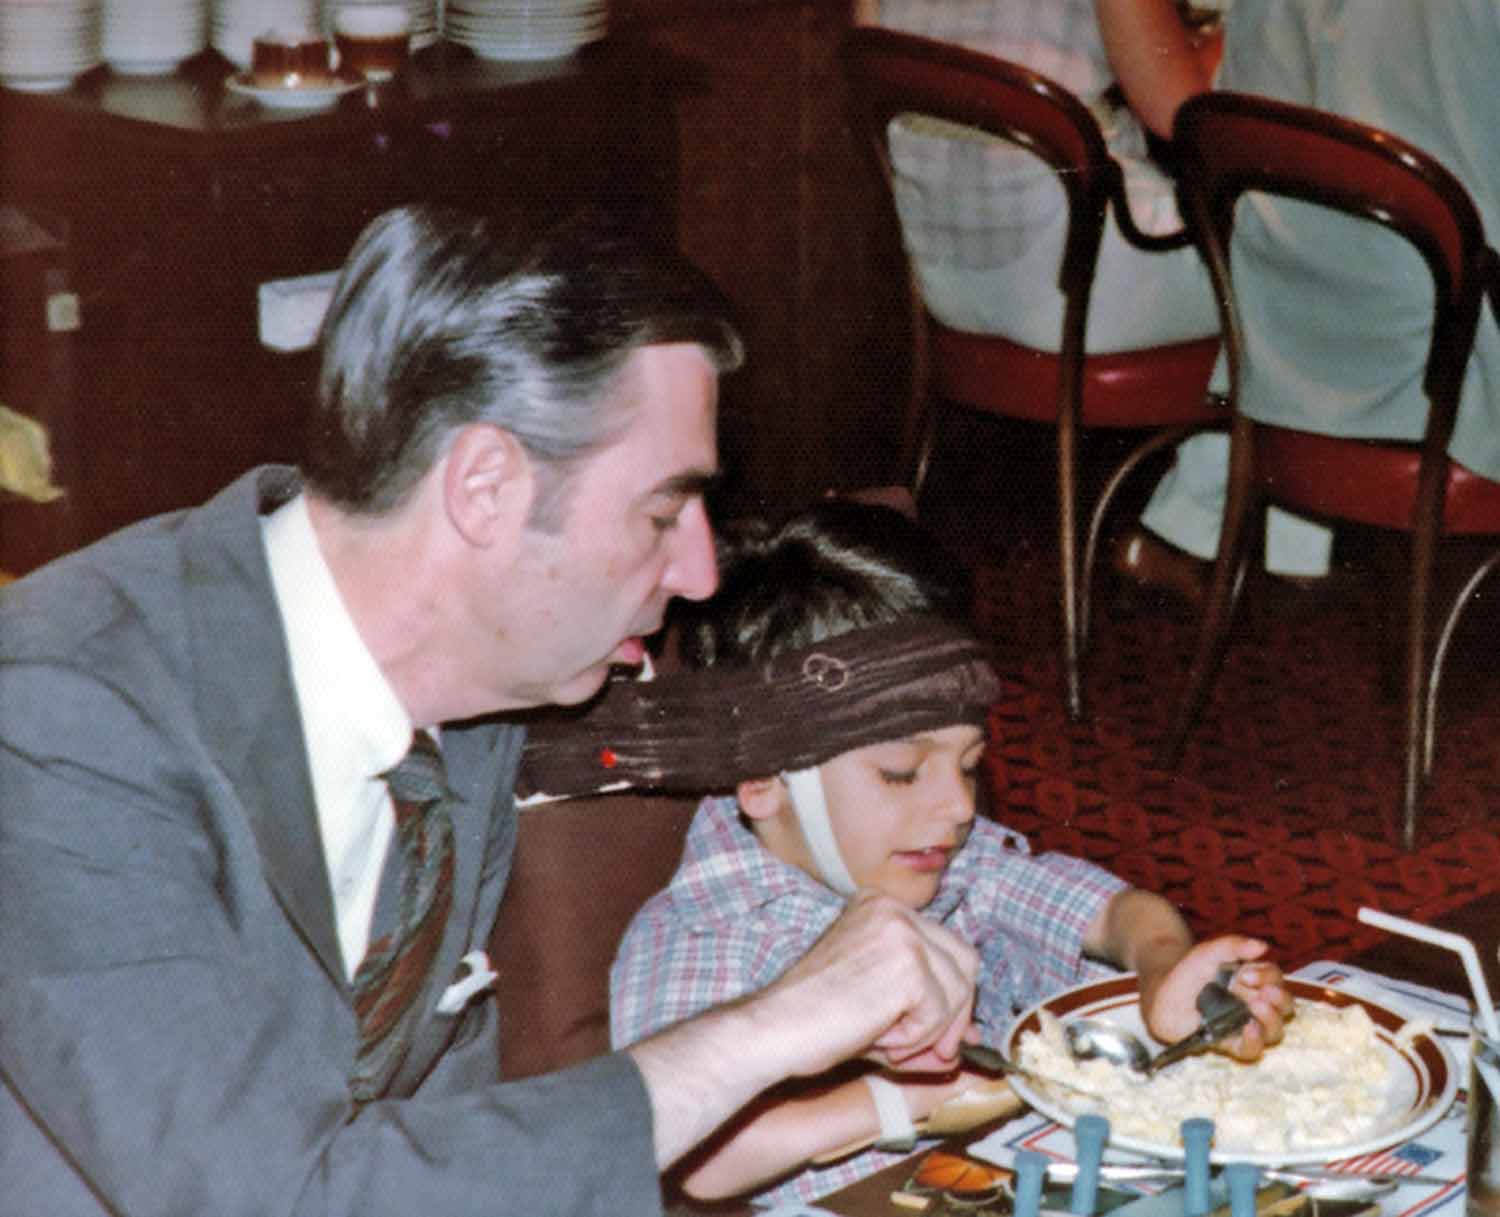 Fred Rogers and Jeff Erlanger in the mid-1970s.